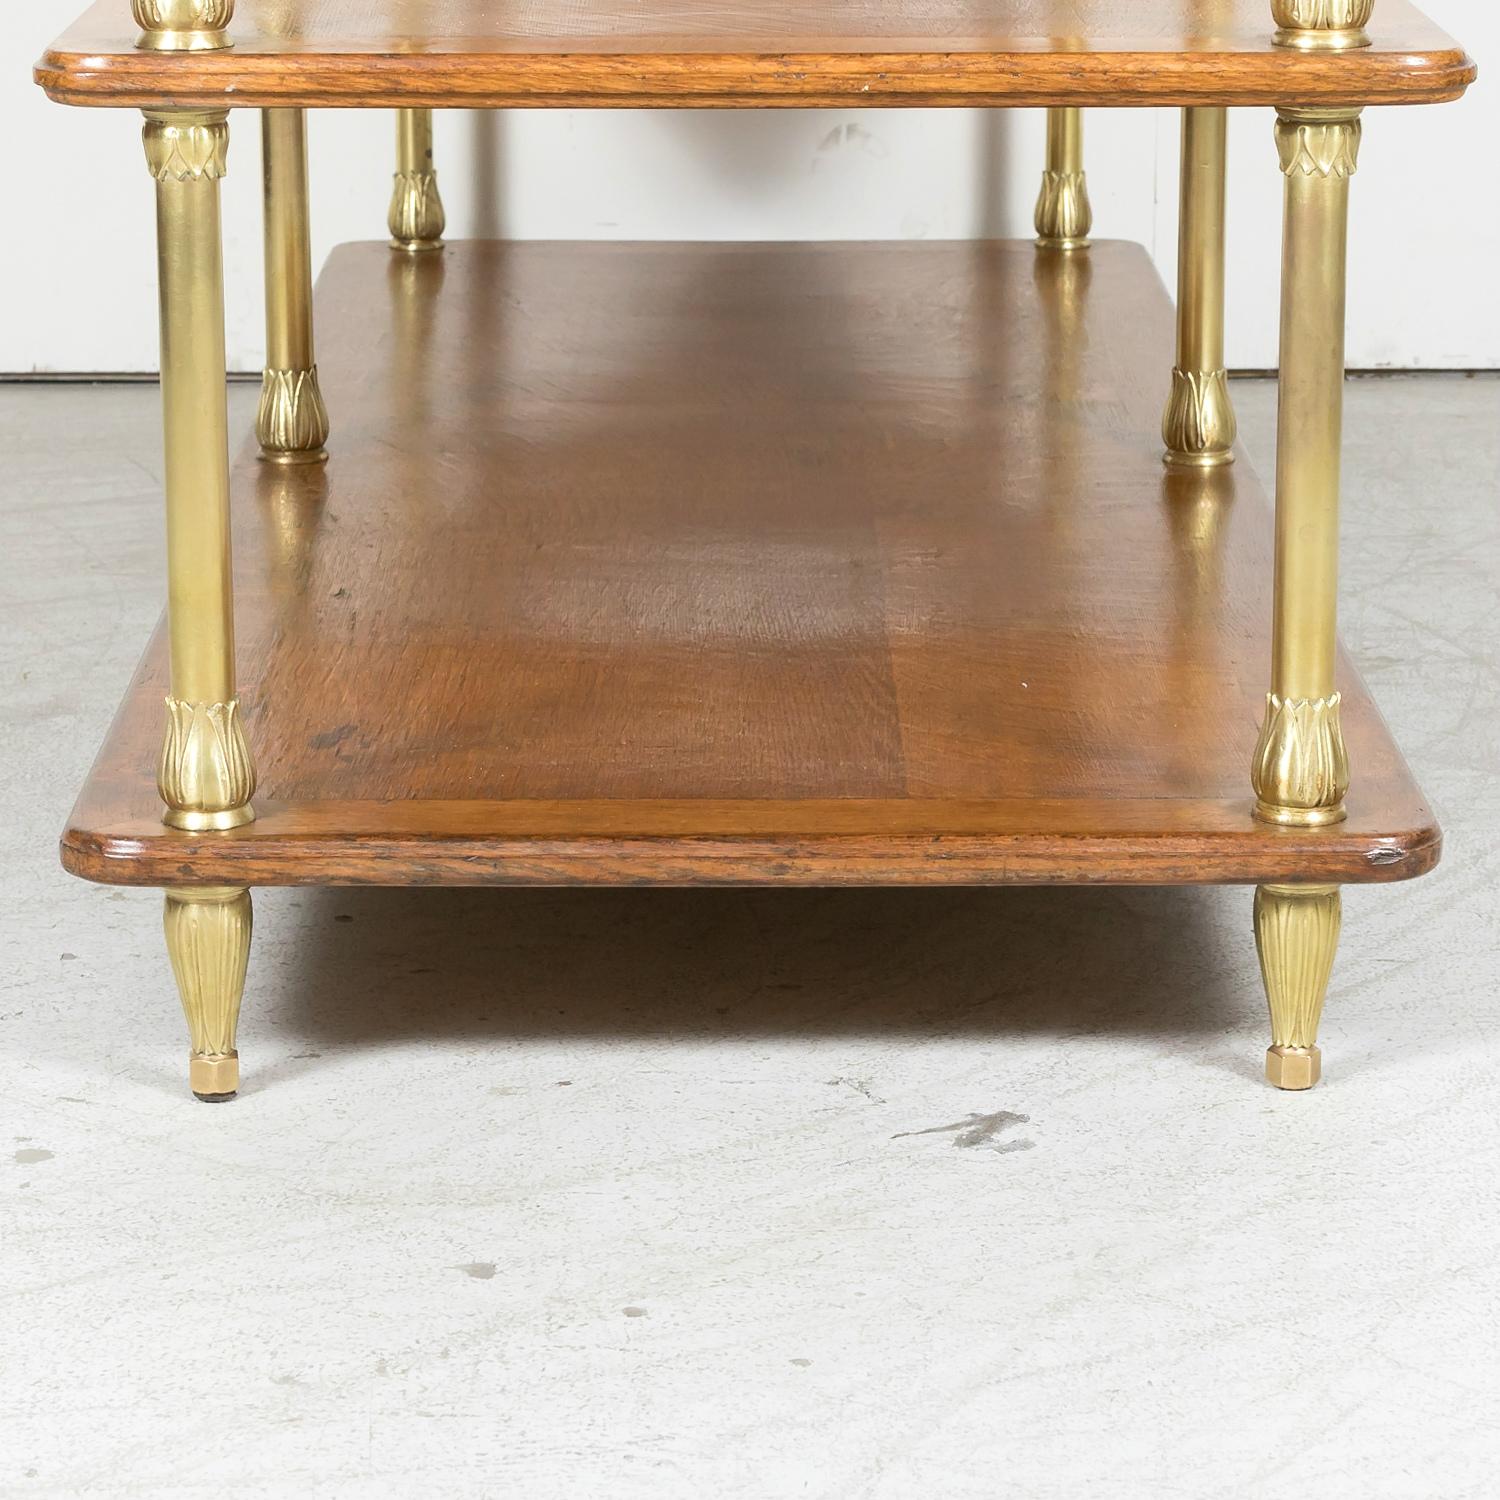 20th Century French Art Deco Period Oak and Brass Display Table / Kitchen Island 16